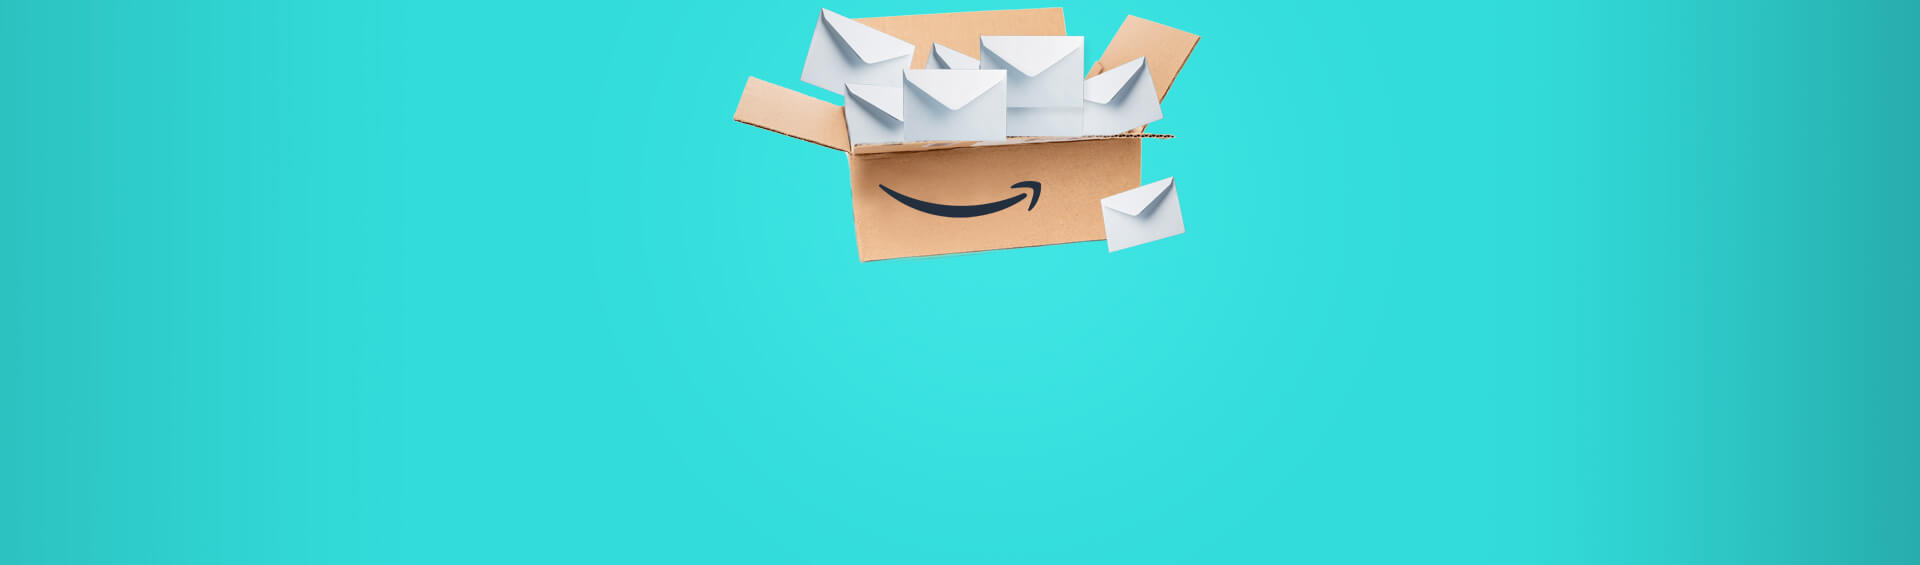 Best Tips on How To Develop an Effective Amazon Email Marketing Strategy